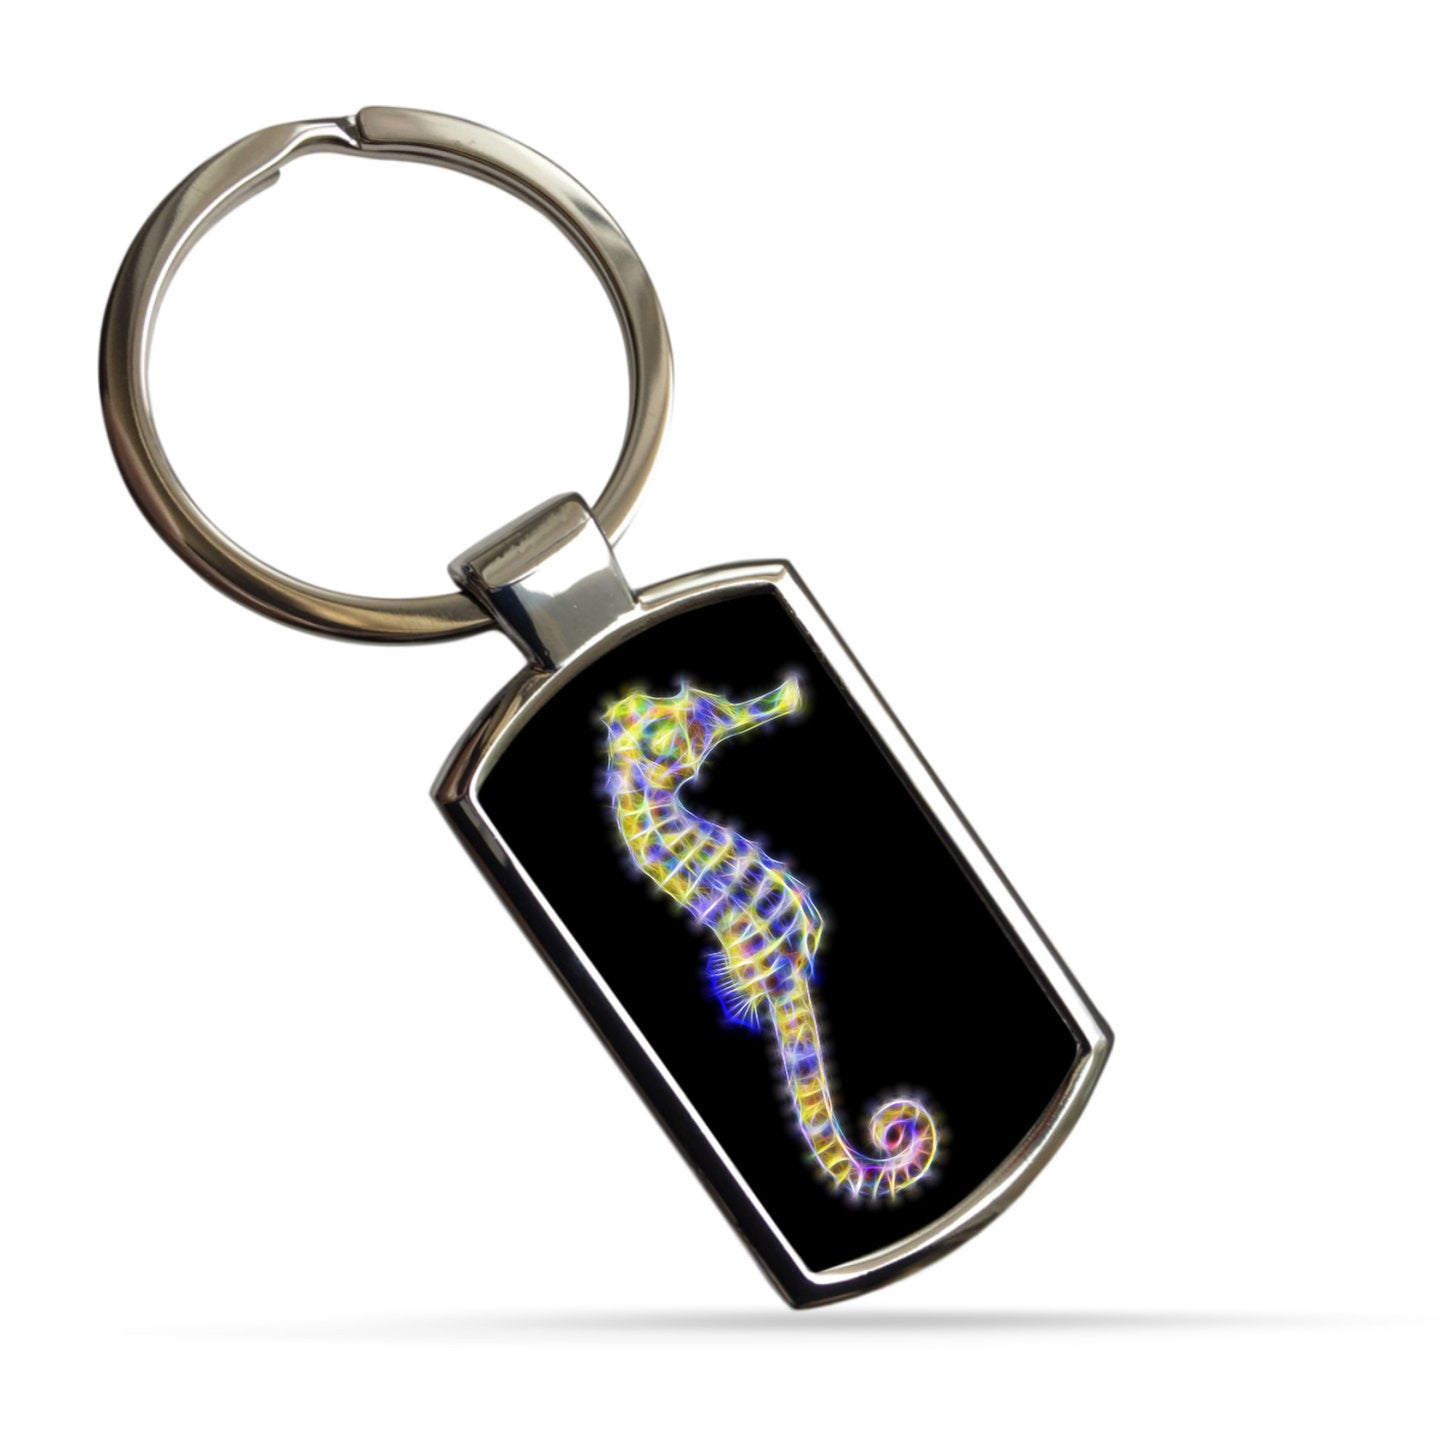 Seahorse Keychain. A Perfect Gift for Aquatic Lover.